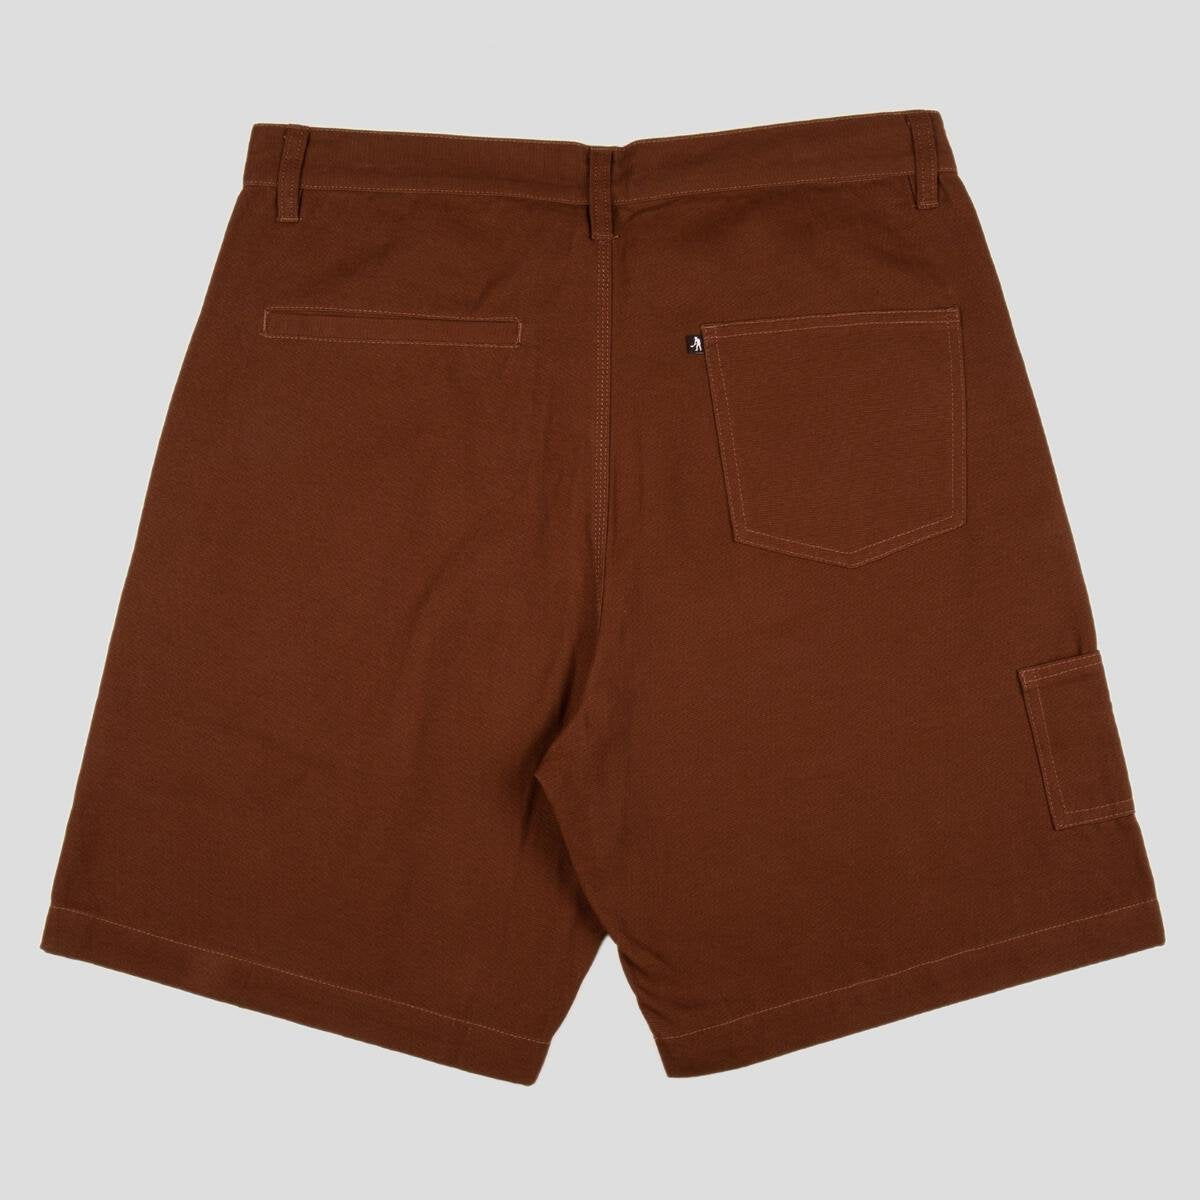 PASS~PORT SKATEBOARDS MOVERS SHORTS BROWN